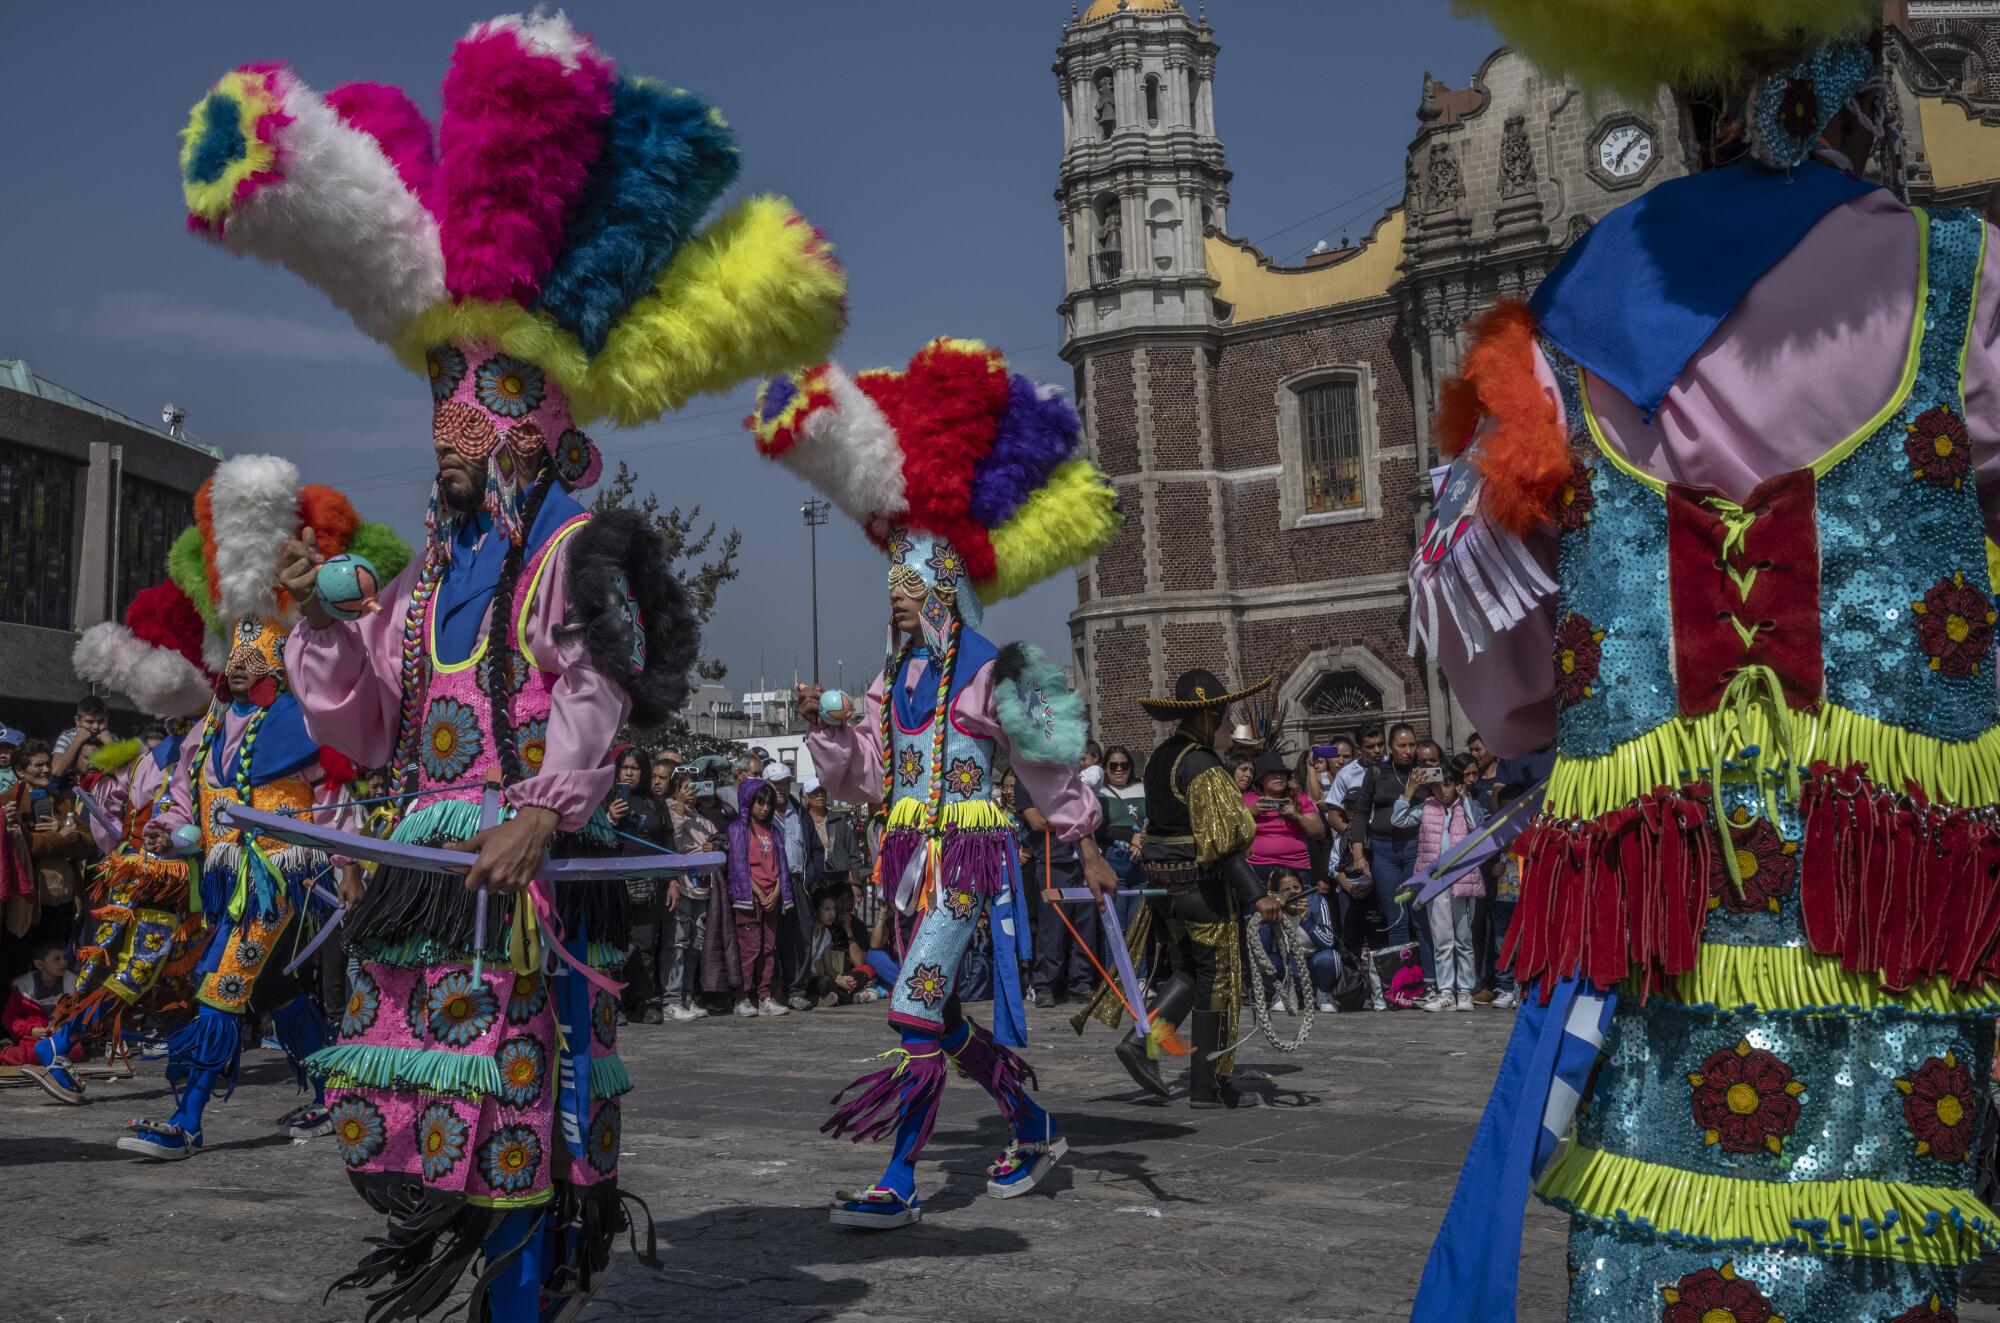 Dancers from Aguascalientes perform a traditional dance at the Basilica of Guadalupe on Dec. 12 in Mexico City.